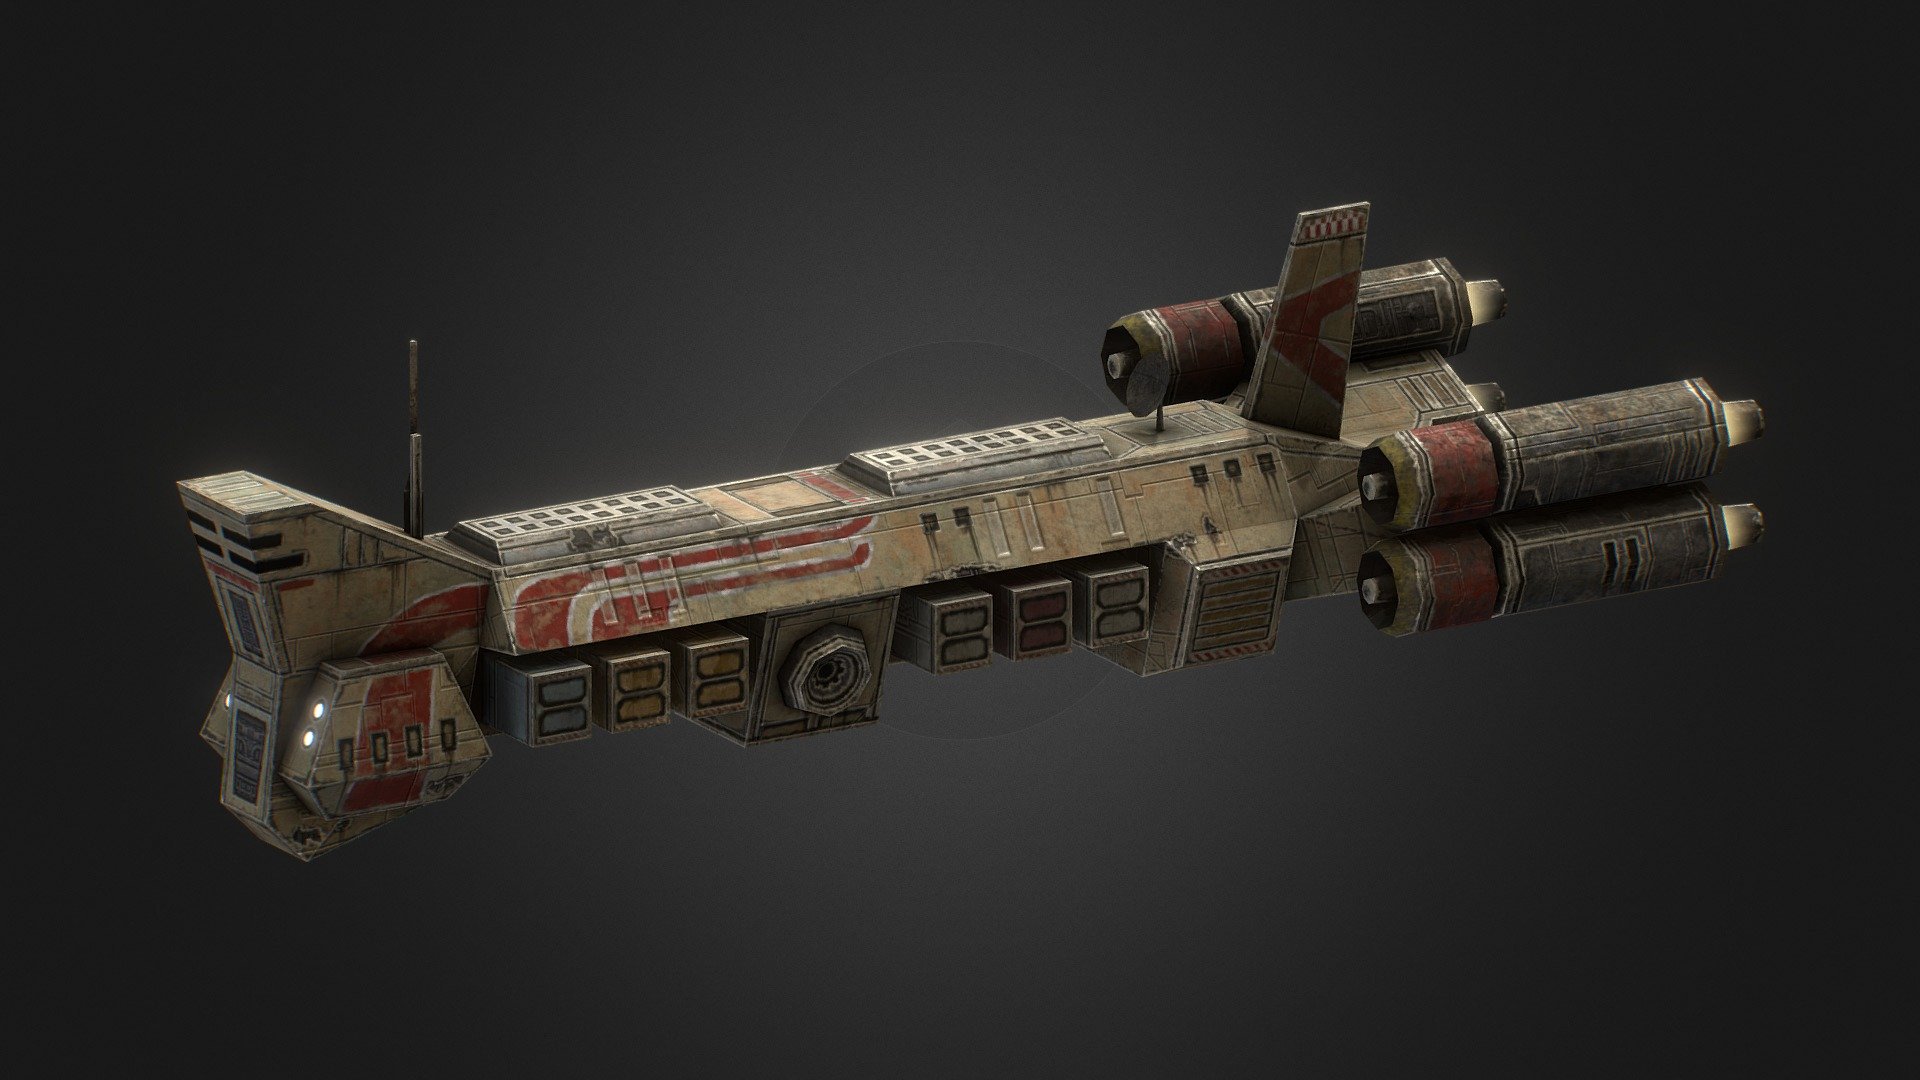 Retexturing commission of the Lok Transport from from the classic game Jedi Starfighter. Only minor changes/fixes and optimizations were made to the orginal mesh.

Commisioned by Zespo

WOULD YOU LIKE TO KNOW MORE?

• Check out my other content: linktr.ee/dominion_of_kharak

• Designed as a game asset for older engines 3d model